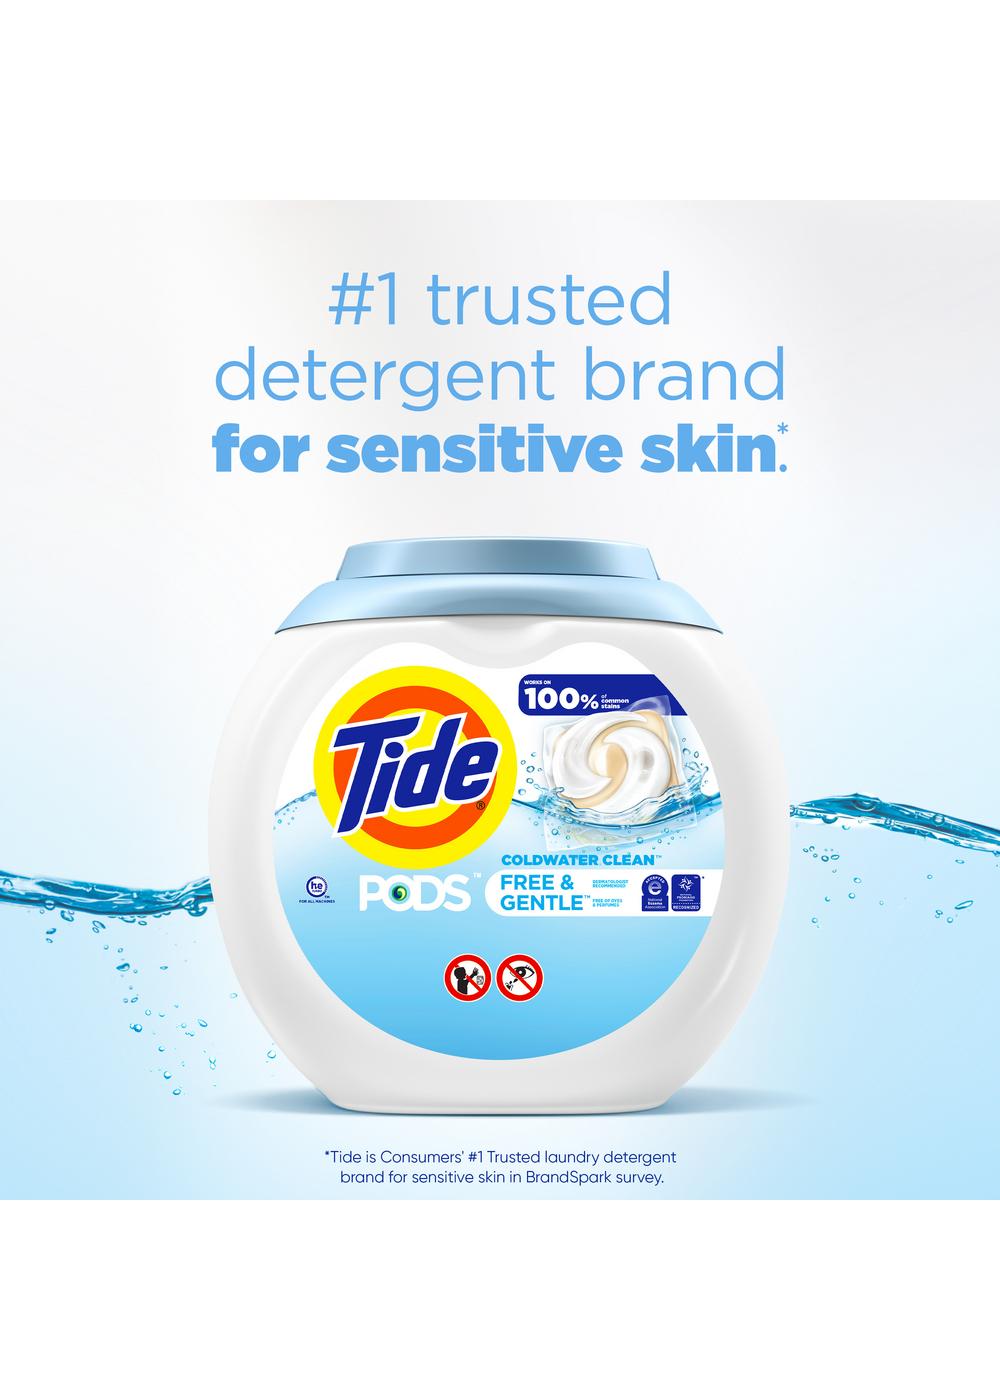 Tide PODS Free & Gentle Coldwater Clean HE Laundry Detergent Pacs; image 9 of 10